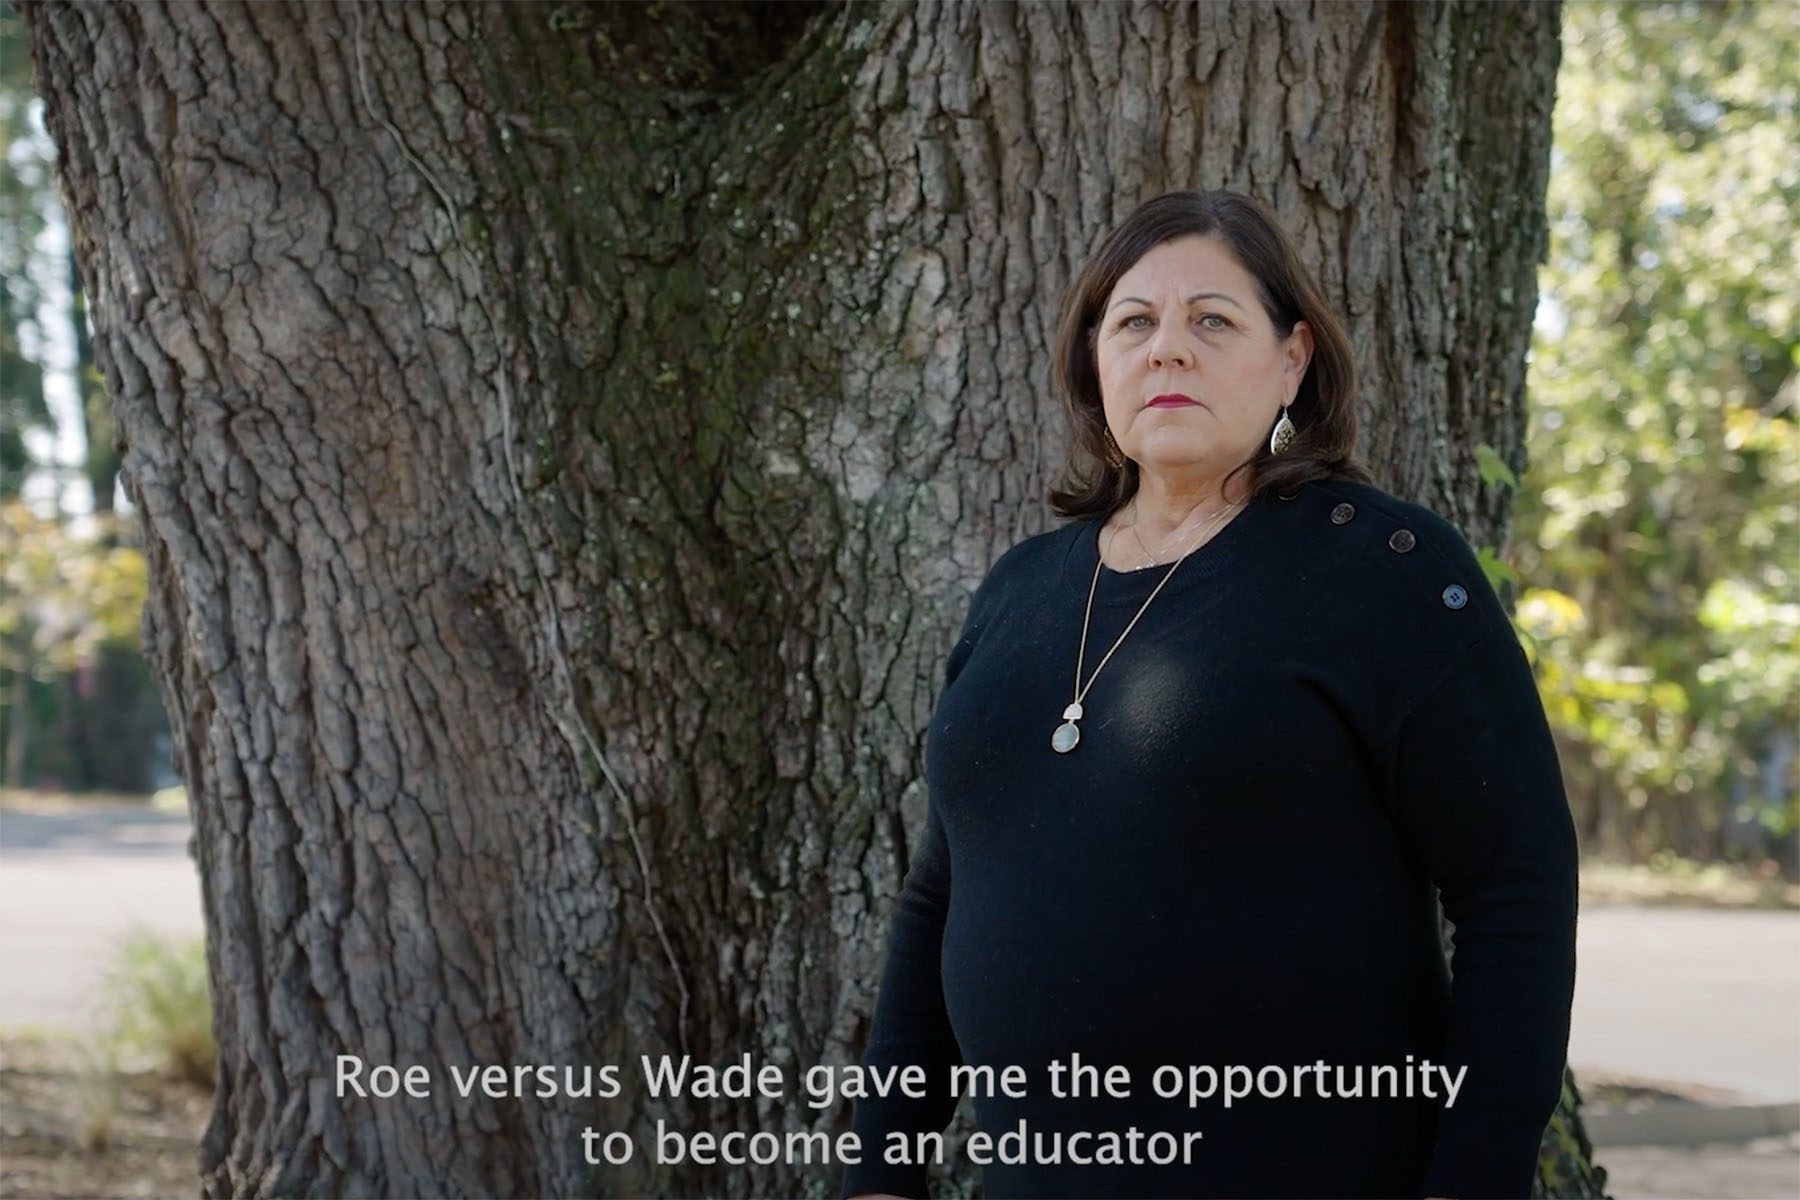 screenshot from South Carolina governor candidate Joe Cunningham’s newest ad in which a woman named Fran shares her abortion story. She is seen here standing near a tree and looking at the camera. The subtitles read "Roe versus Wade gave me the opportunity to become an educator."